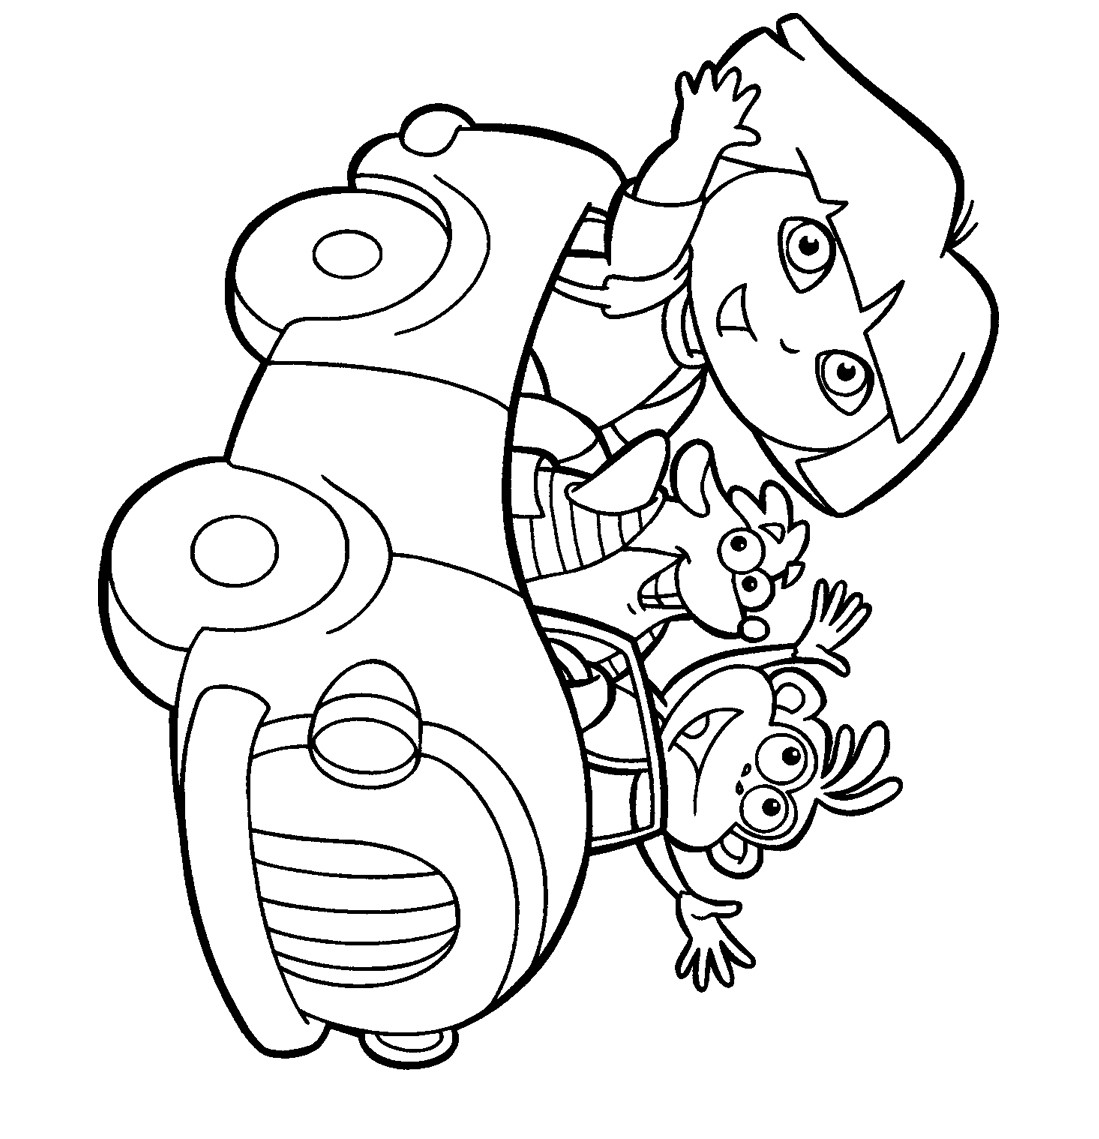 Coloring Printables For Kids
 Printable coloring pages for kids